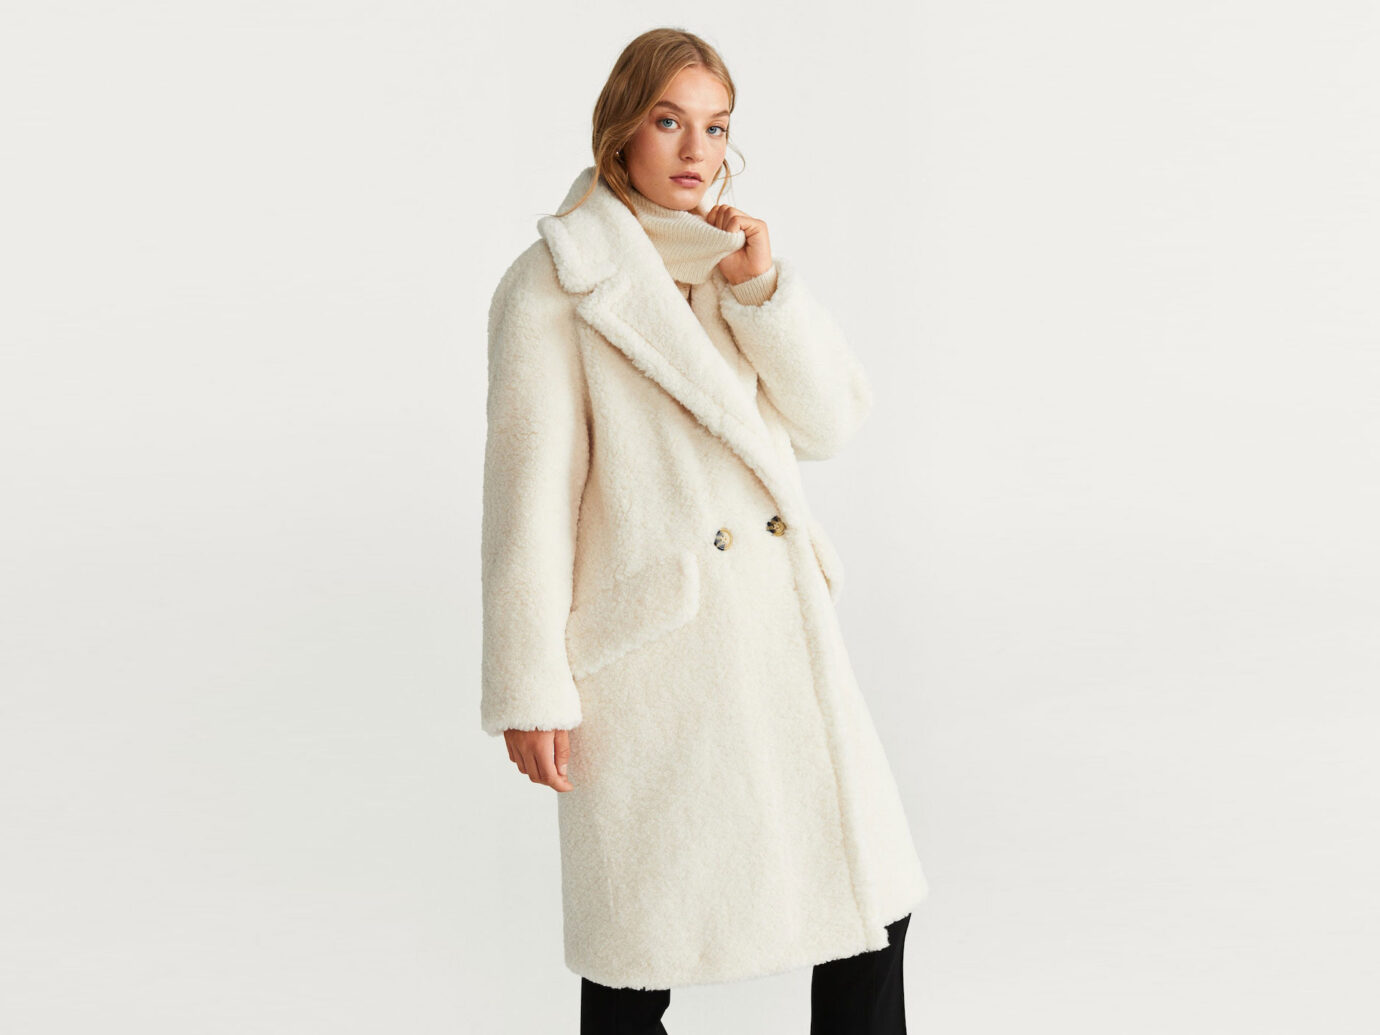 How to choose your first coat for winter